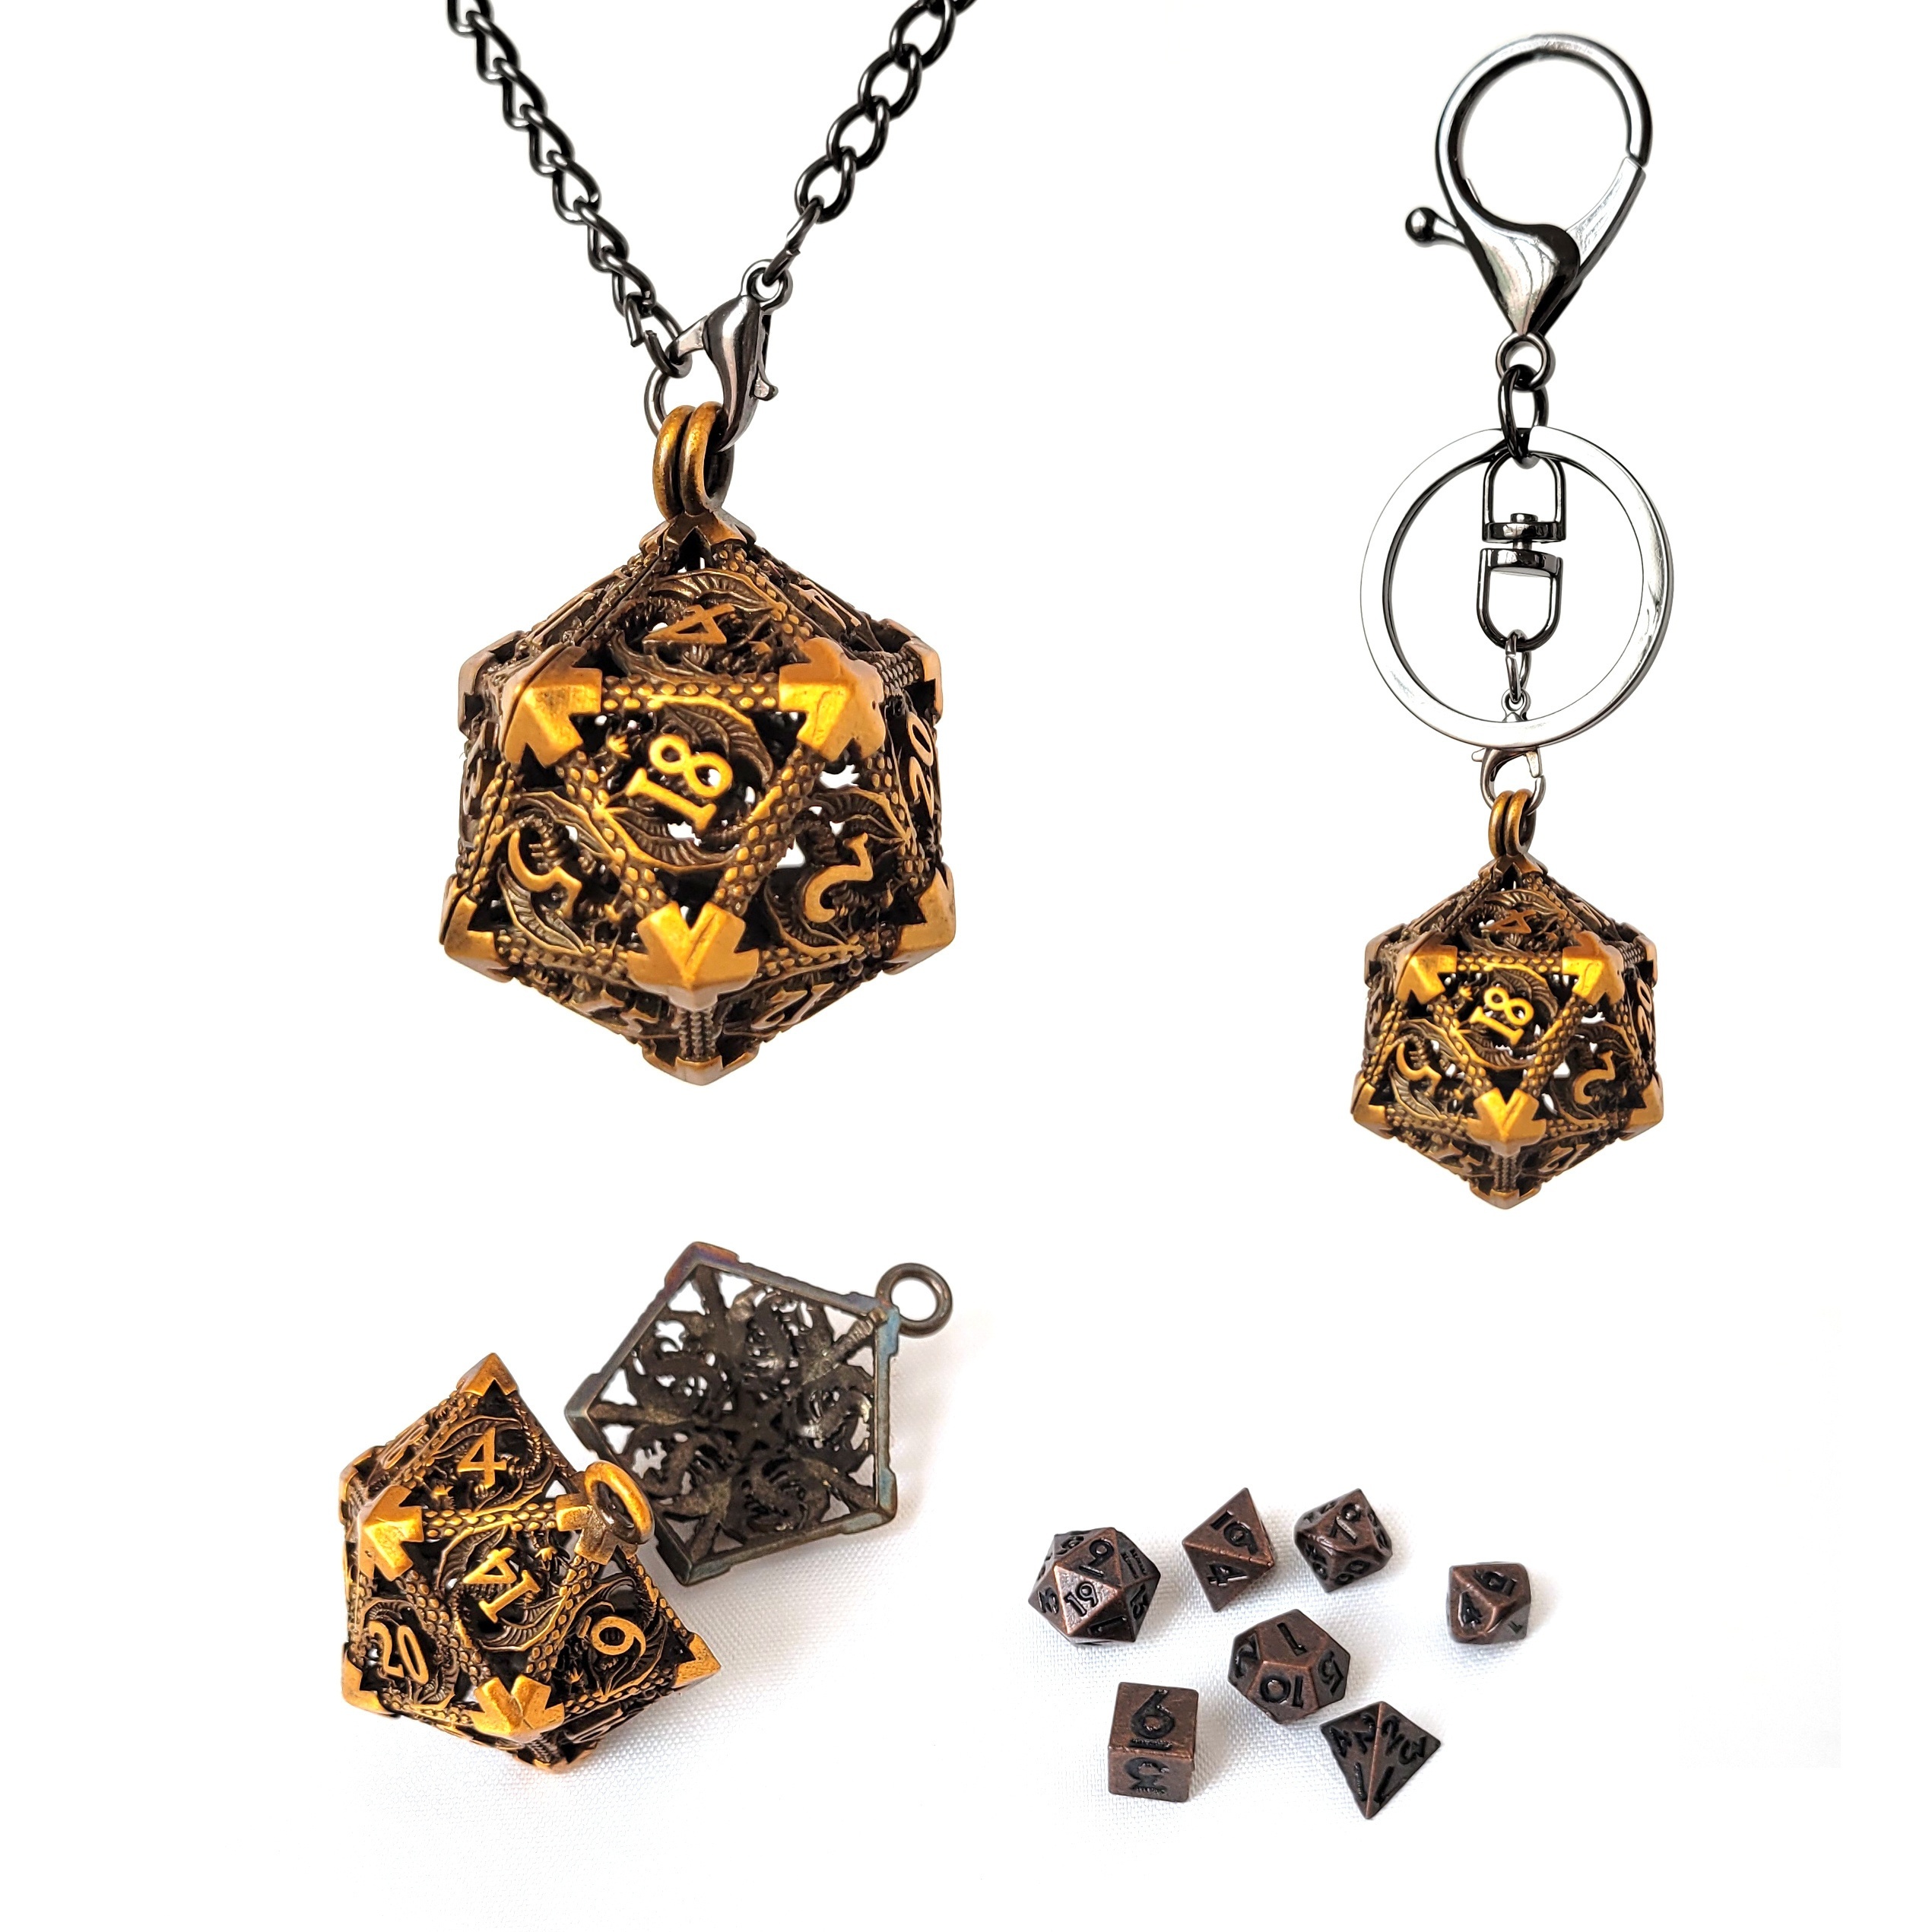 

New Hollow Pendant Travel Mini 7pcs Dice Set, Role-playing Game Toy Necklace Keychain